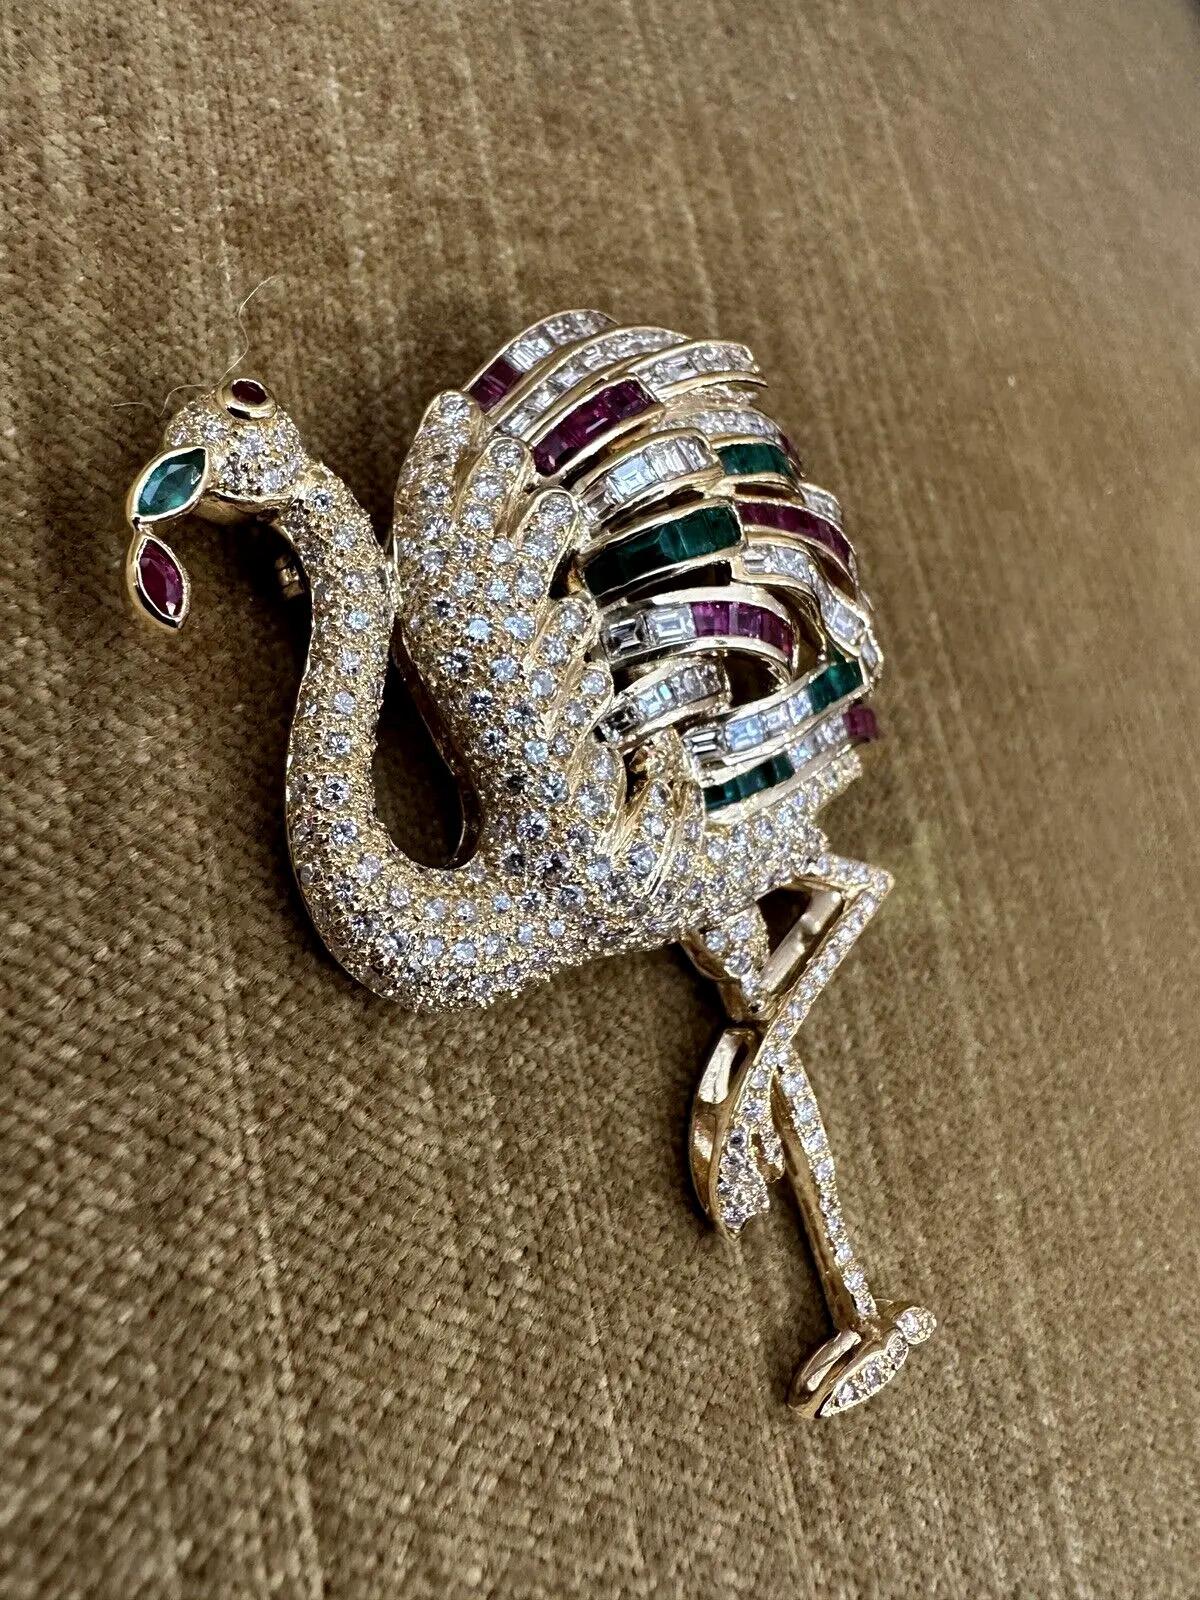 Brilliant Cut Large Diamond Flamingo Brooch with Rubies & Emeralds in 18k Yellow Gold For Sale